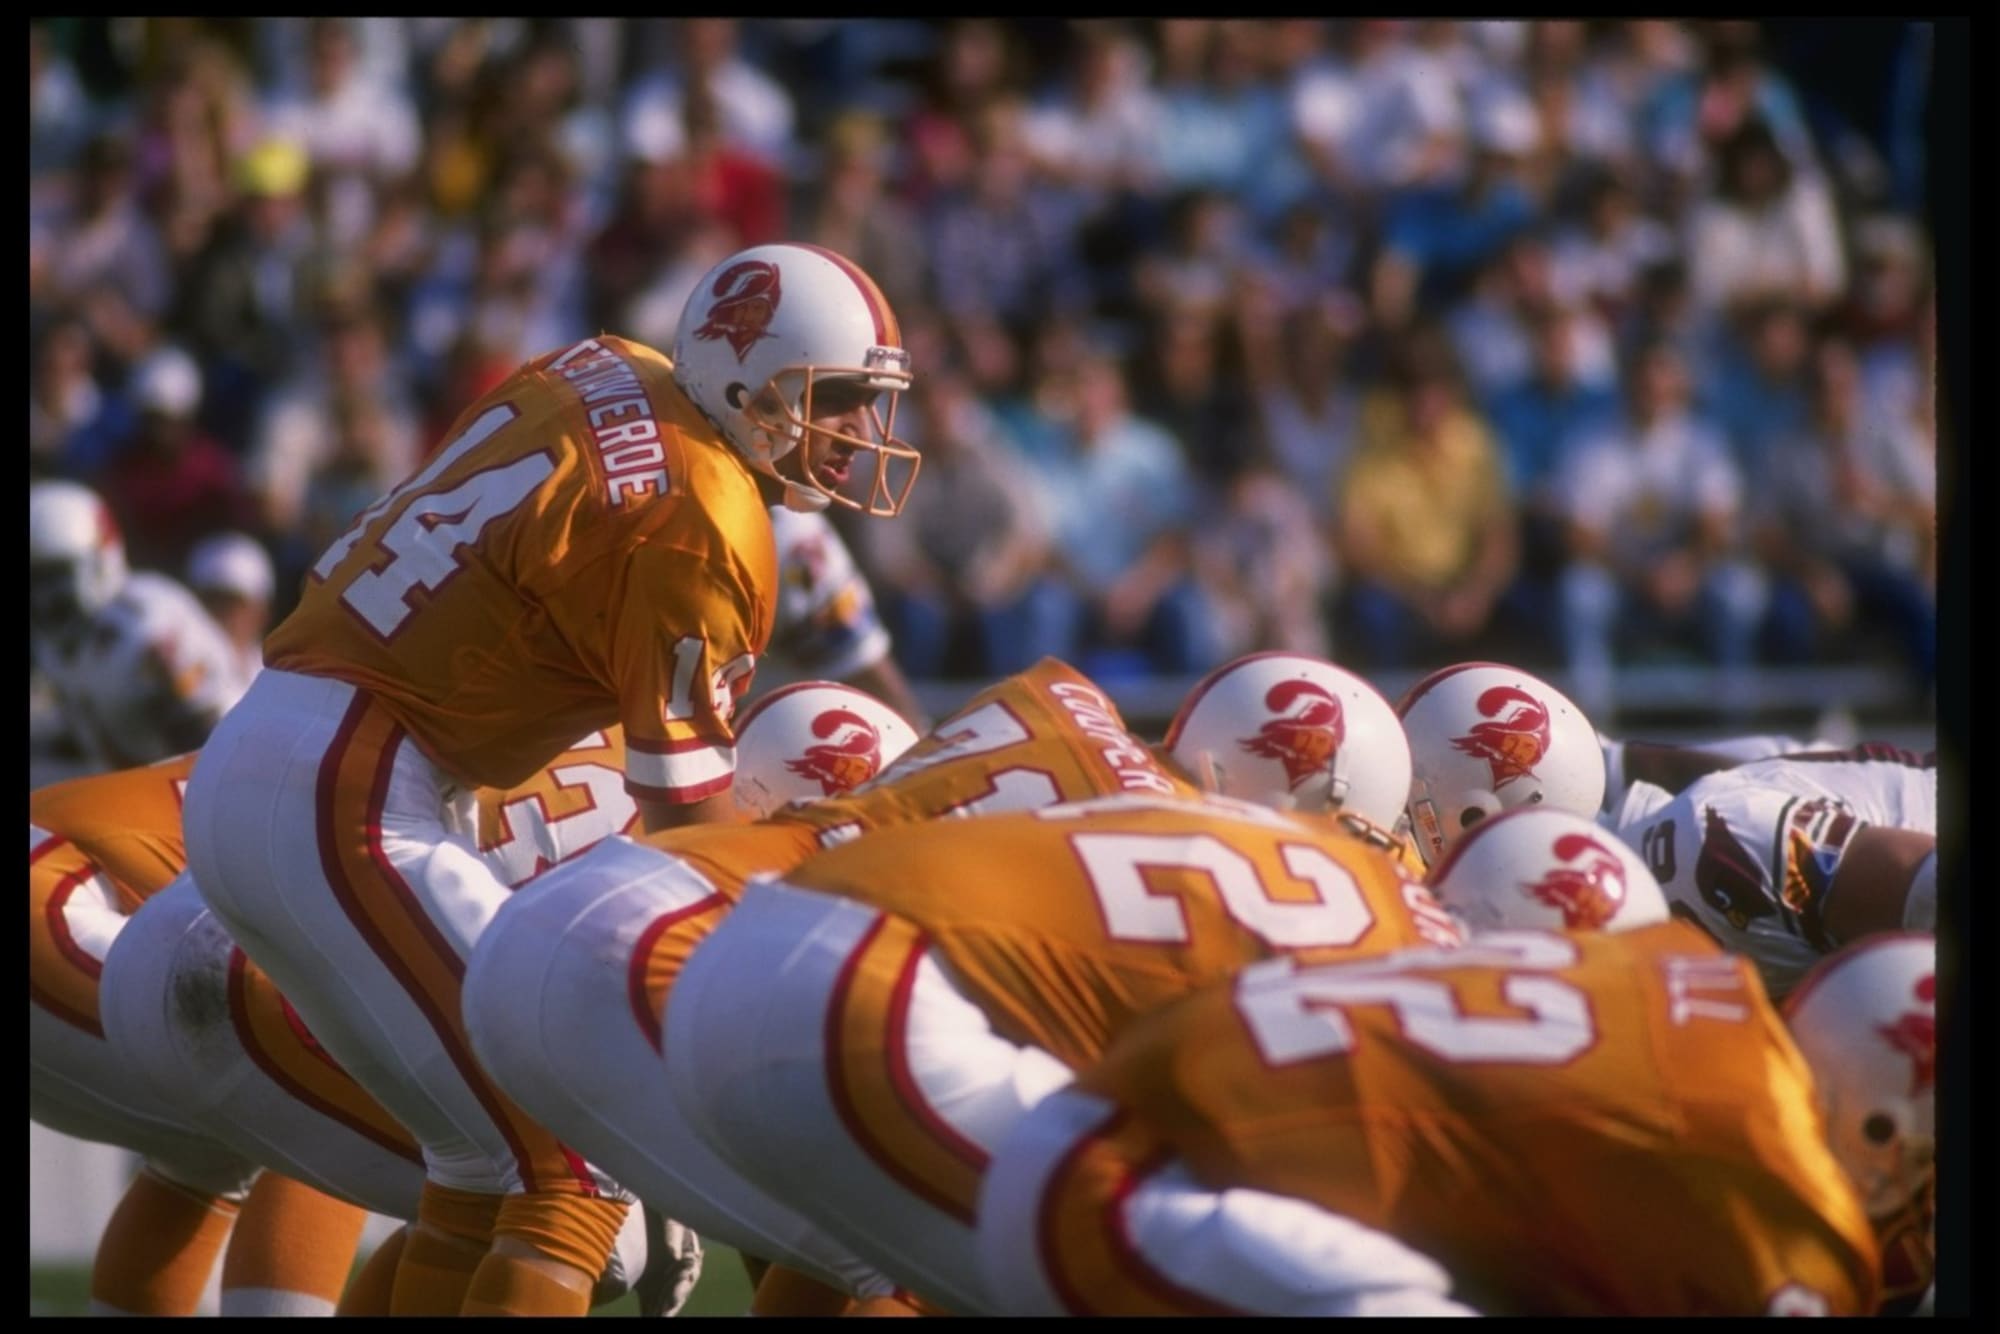 Tampa Bay Buccaneers: Could new uniforms return to creamsicle colors?